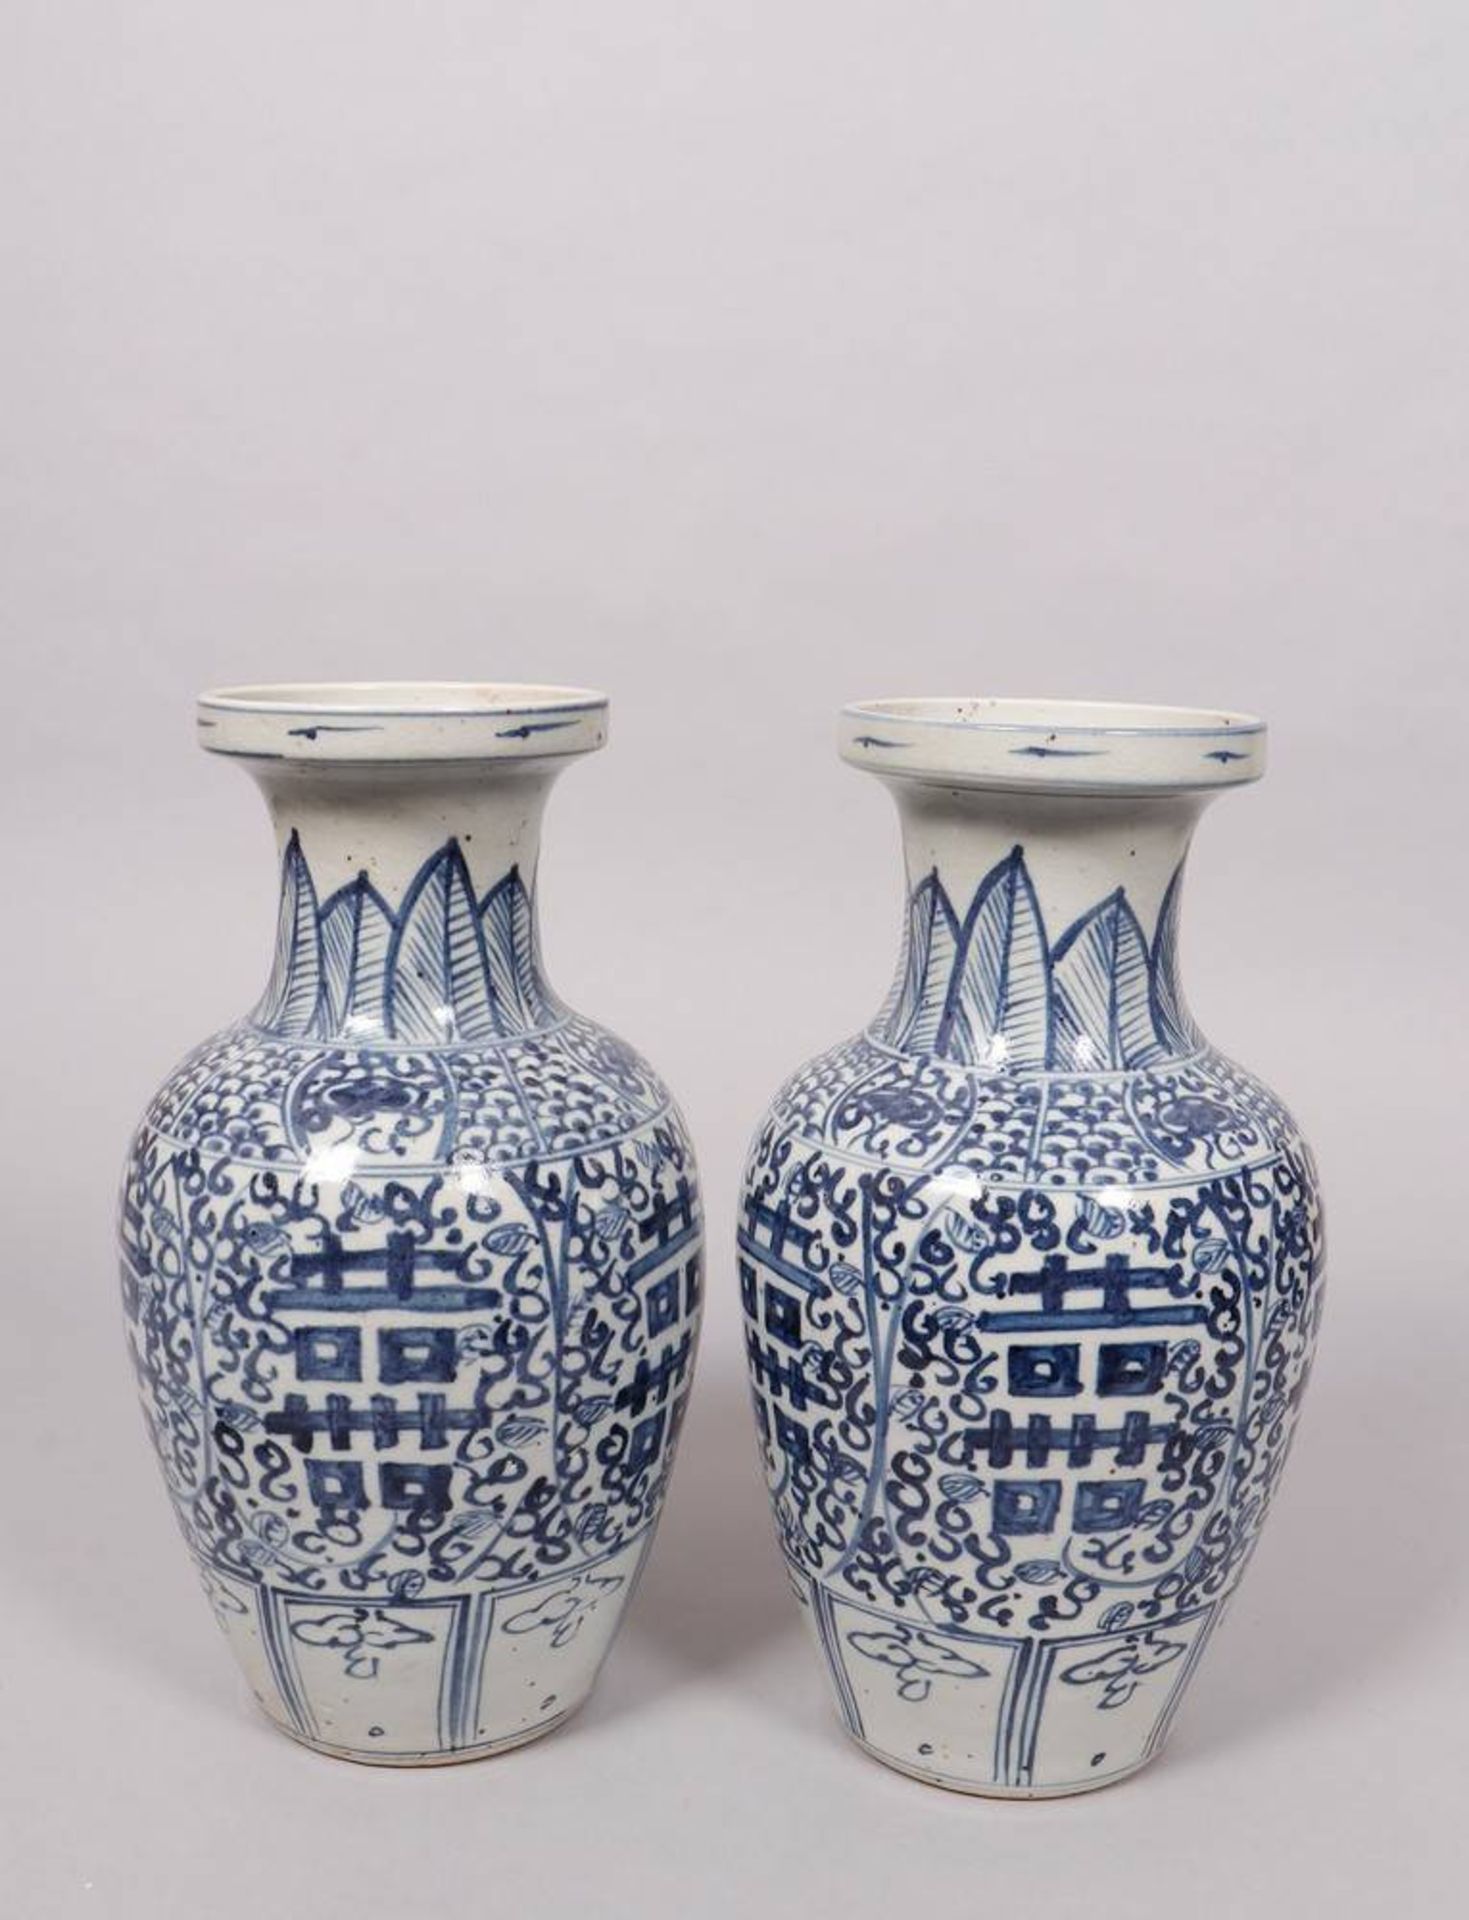 Pair of baluster-vases, China, poss. 18.Jh., porcelain, painted in underglaze blue 